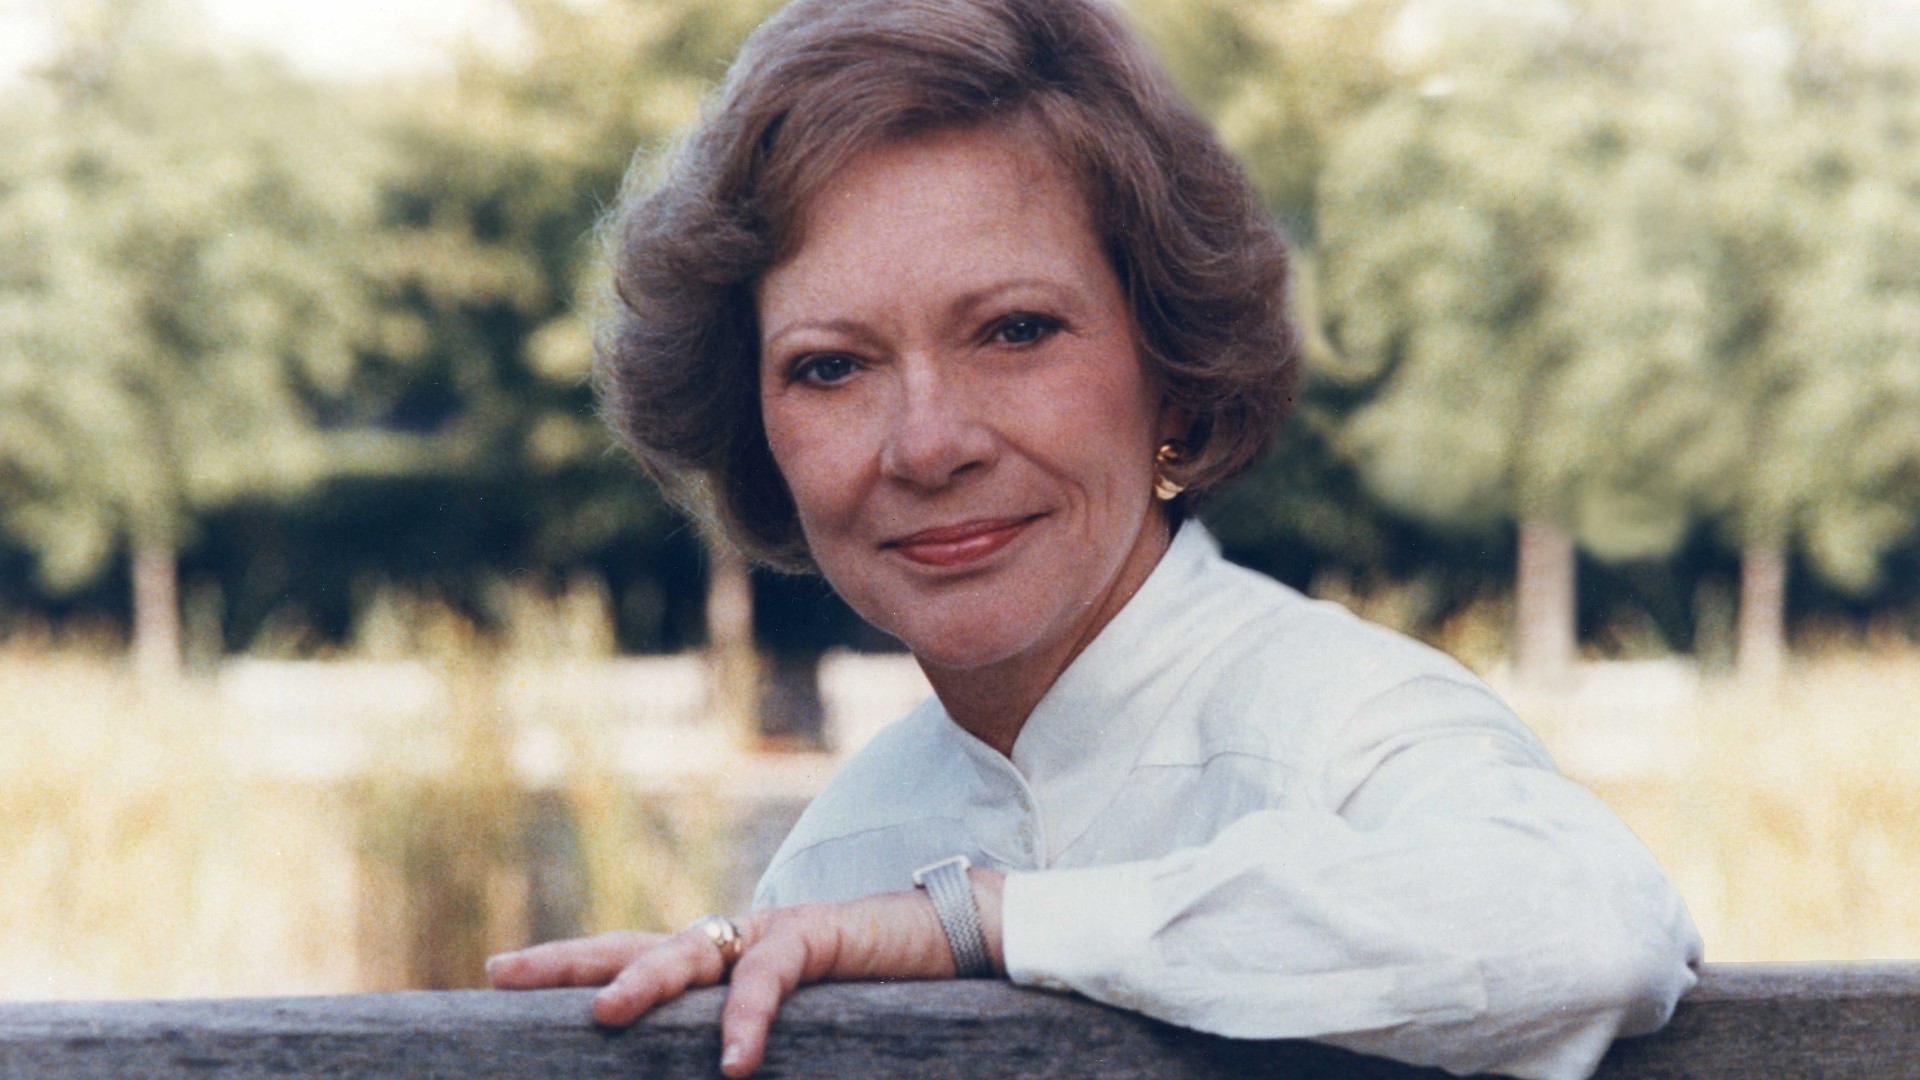 In Plains, family and neighbors grieve the loss of former First Lady Rosalynn Carter and celebrate her global legacy.